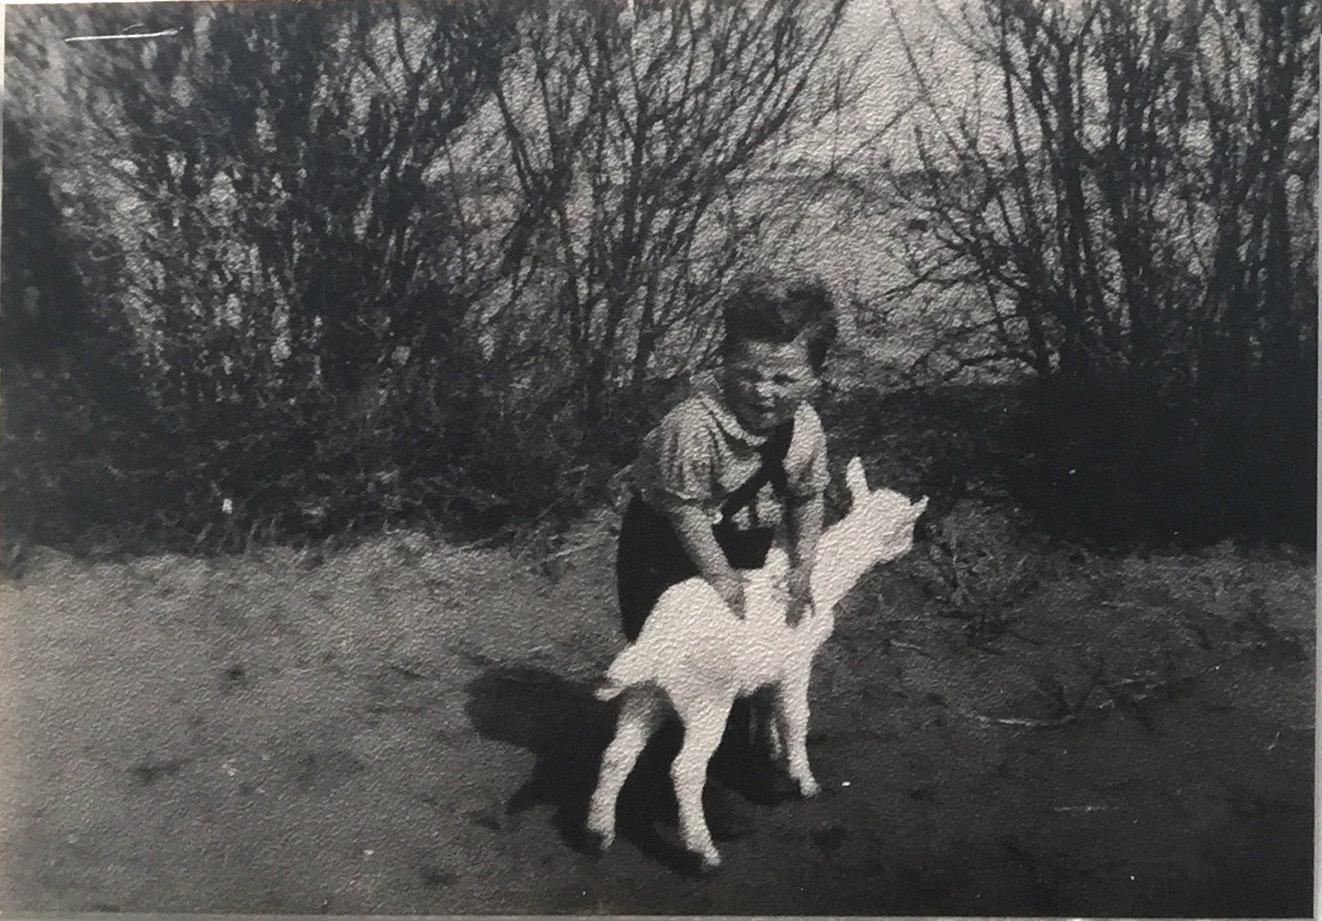 My dad with his best friend in 1940, little did he know that the war was about to begin